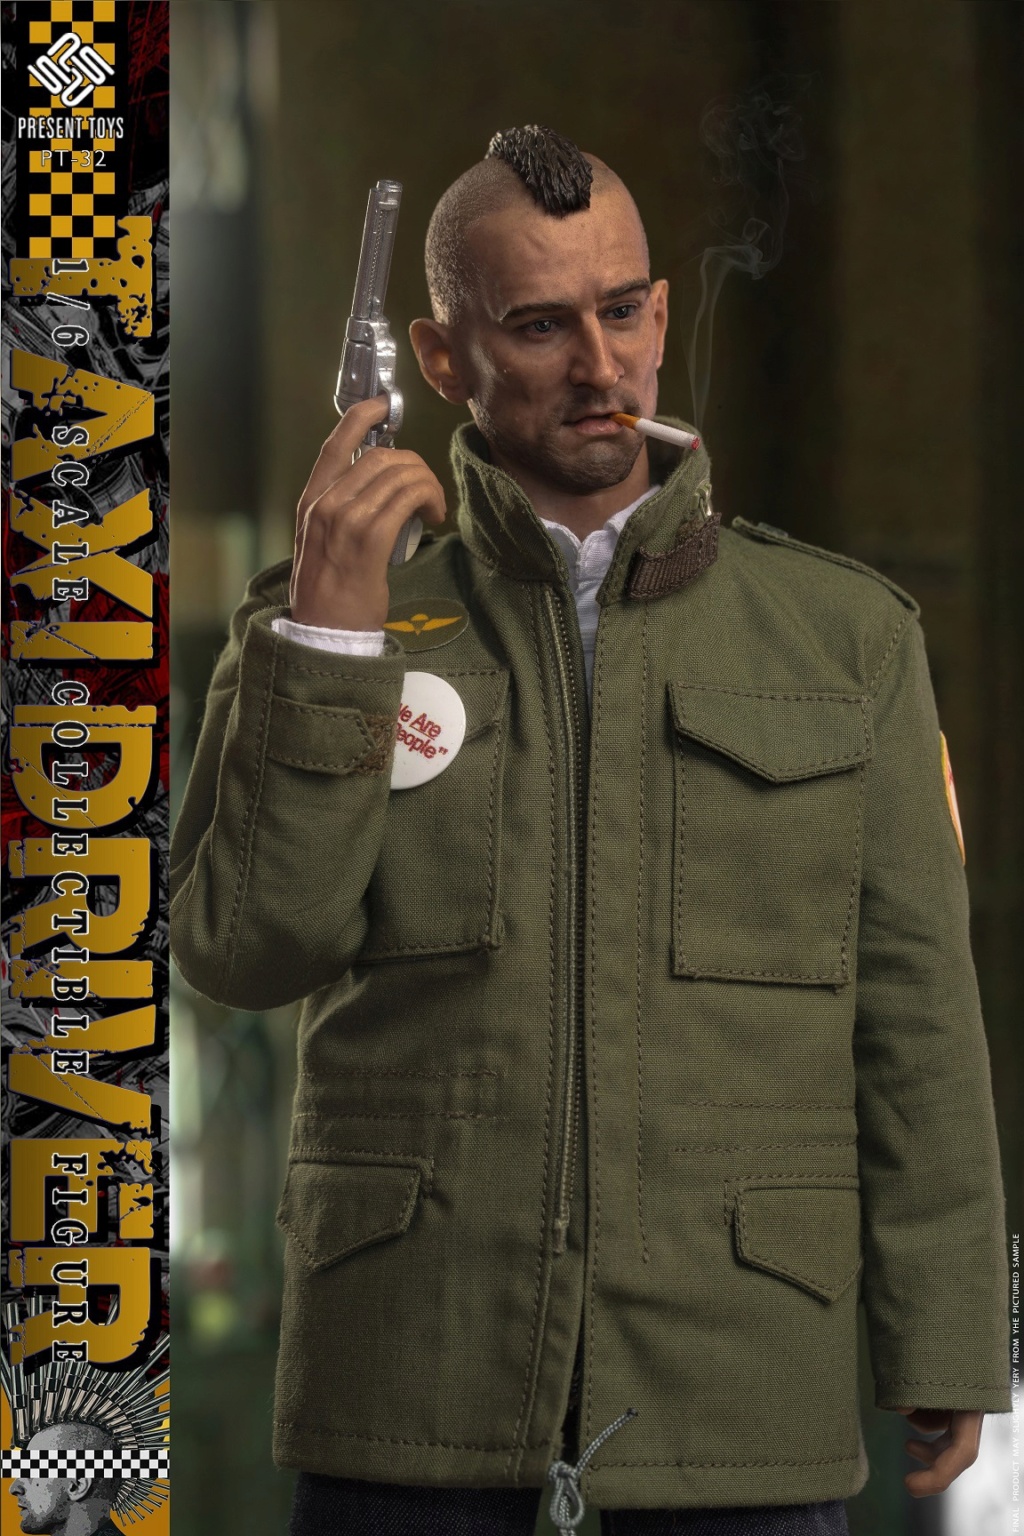 NEW PRODUCT: Present Toys: 1/6 "Taxi Driver" Collection Doll#PT-sp32 18193010